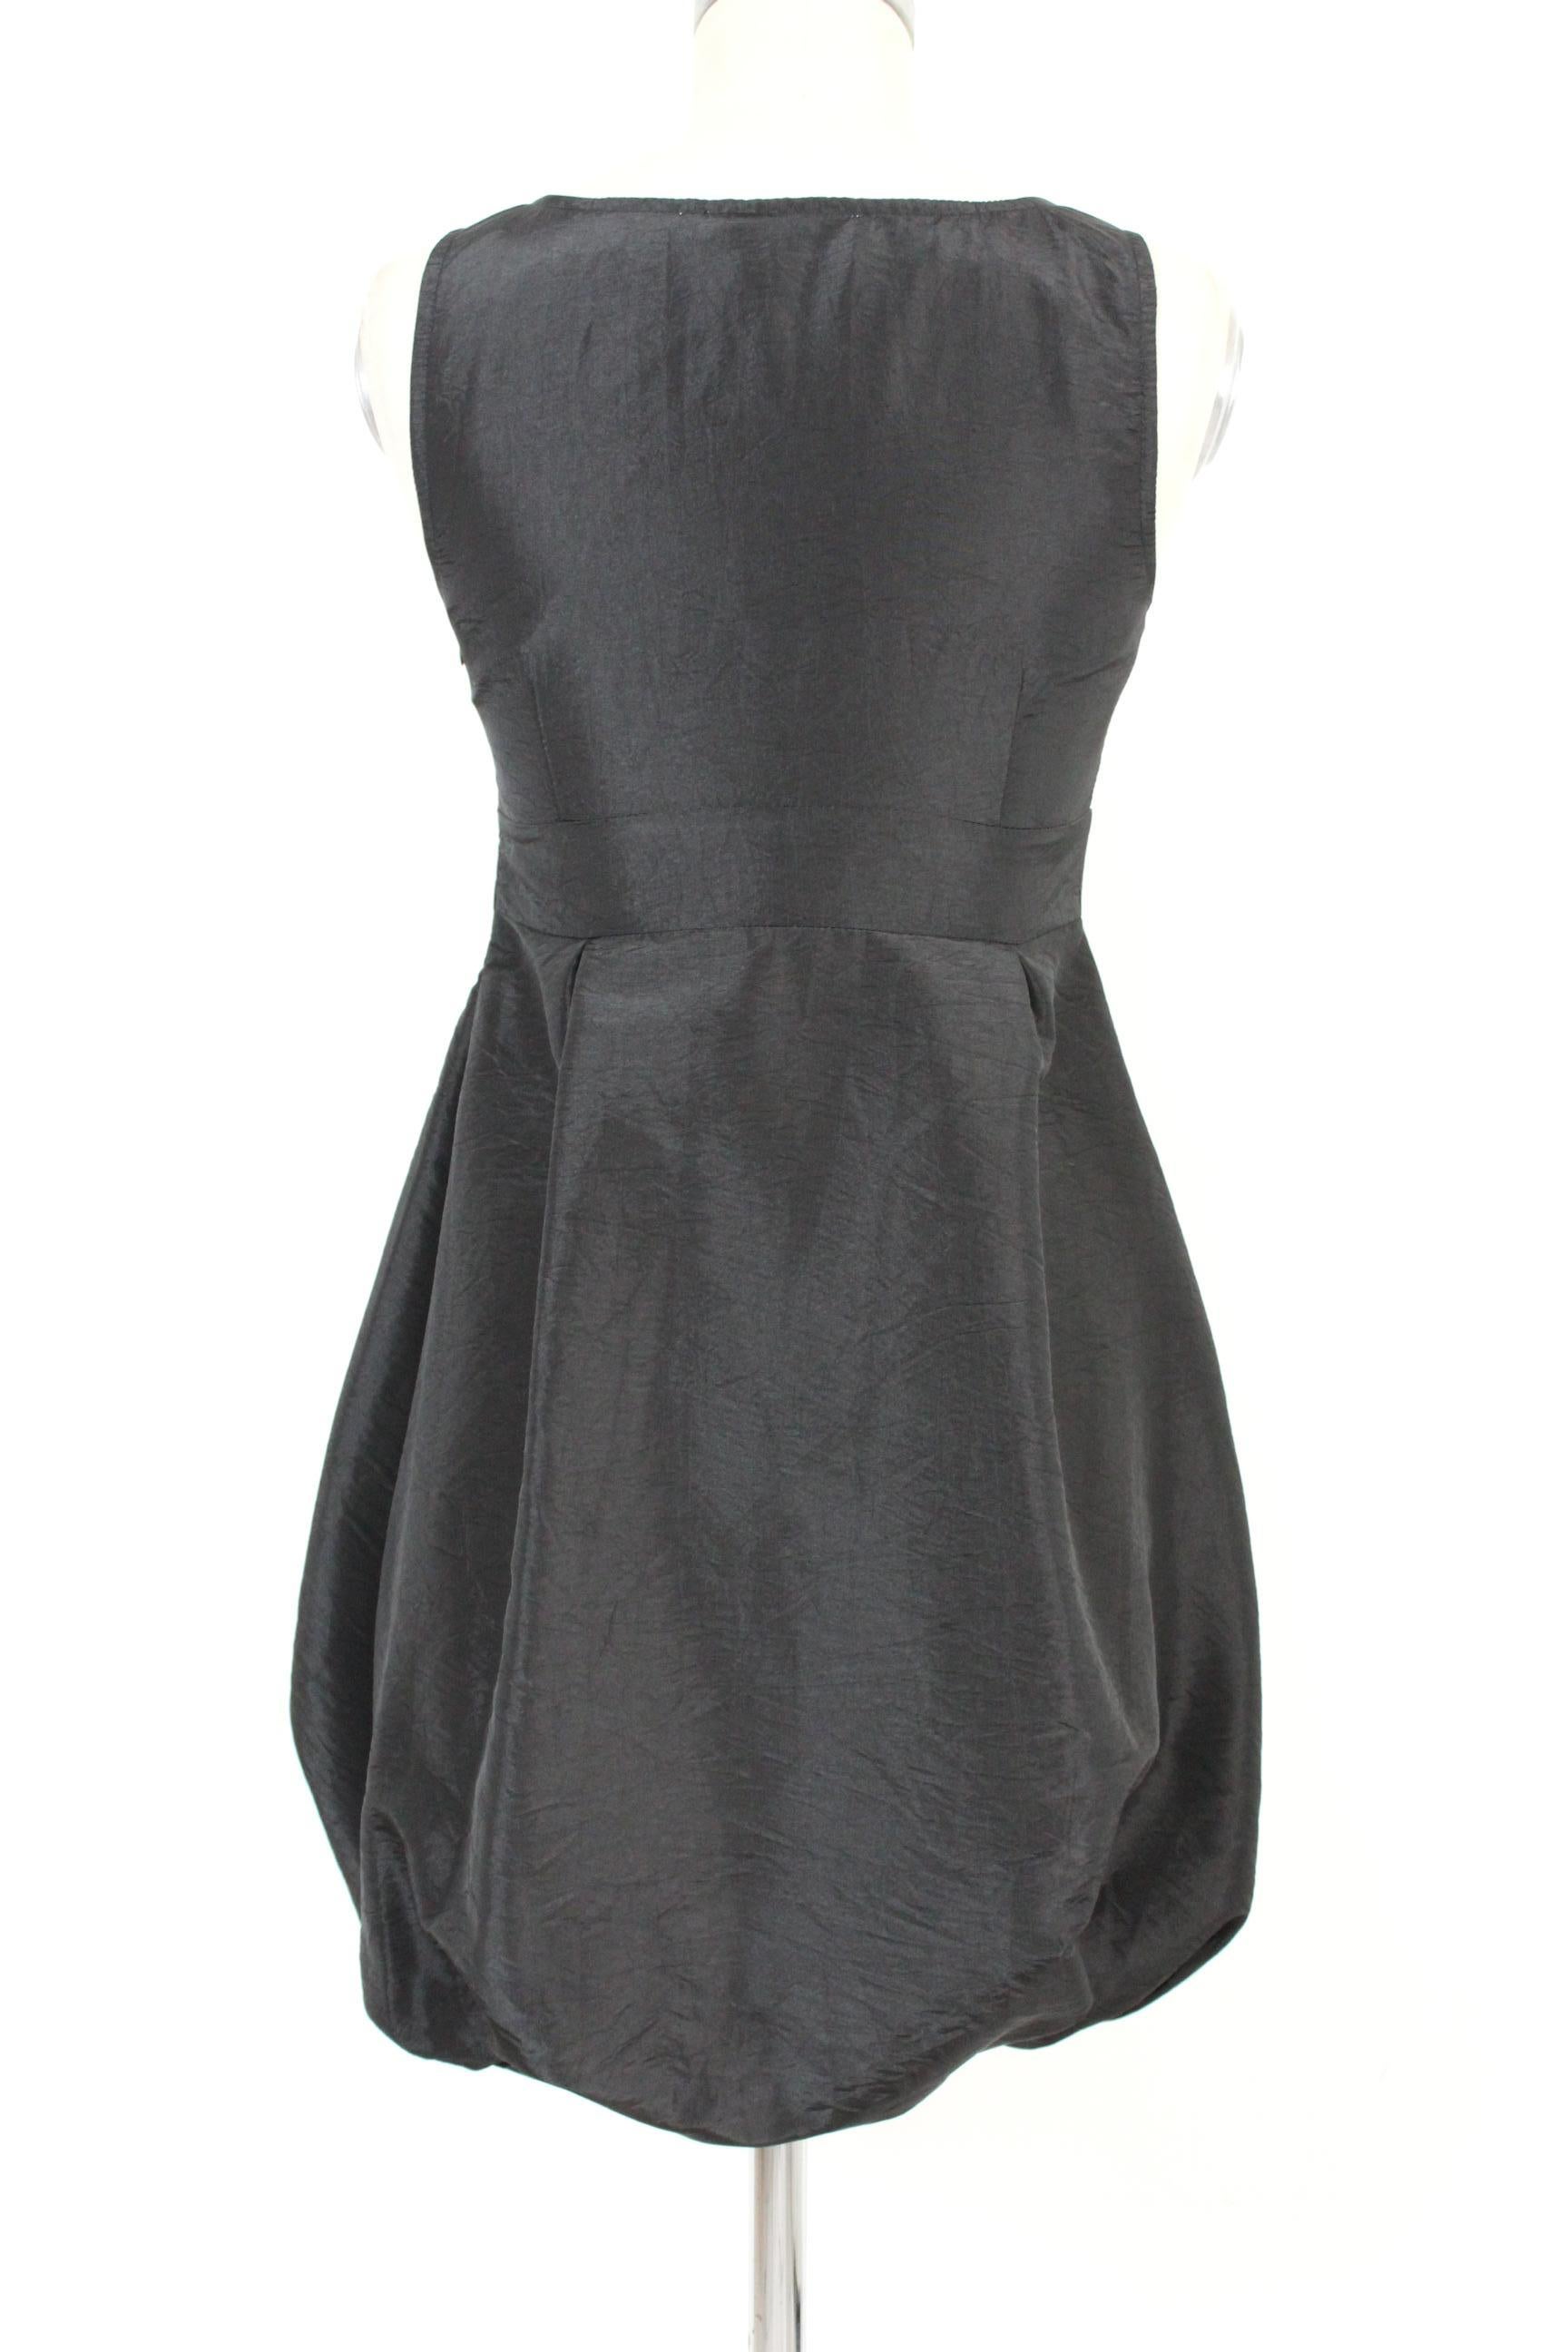 Red Valentino 2000s vintage black dress. Elegant short balloon model, with elastic and waistband. Side zip closure. Composition 100% jersey. Made in Italy. New with tag.

Size: 42 It 8 Us 10 Uk

Shoulder: 42 cm 
Chest / Chest: 43 cm 
Length: 86 cm